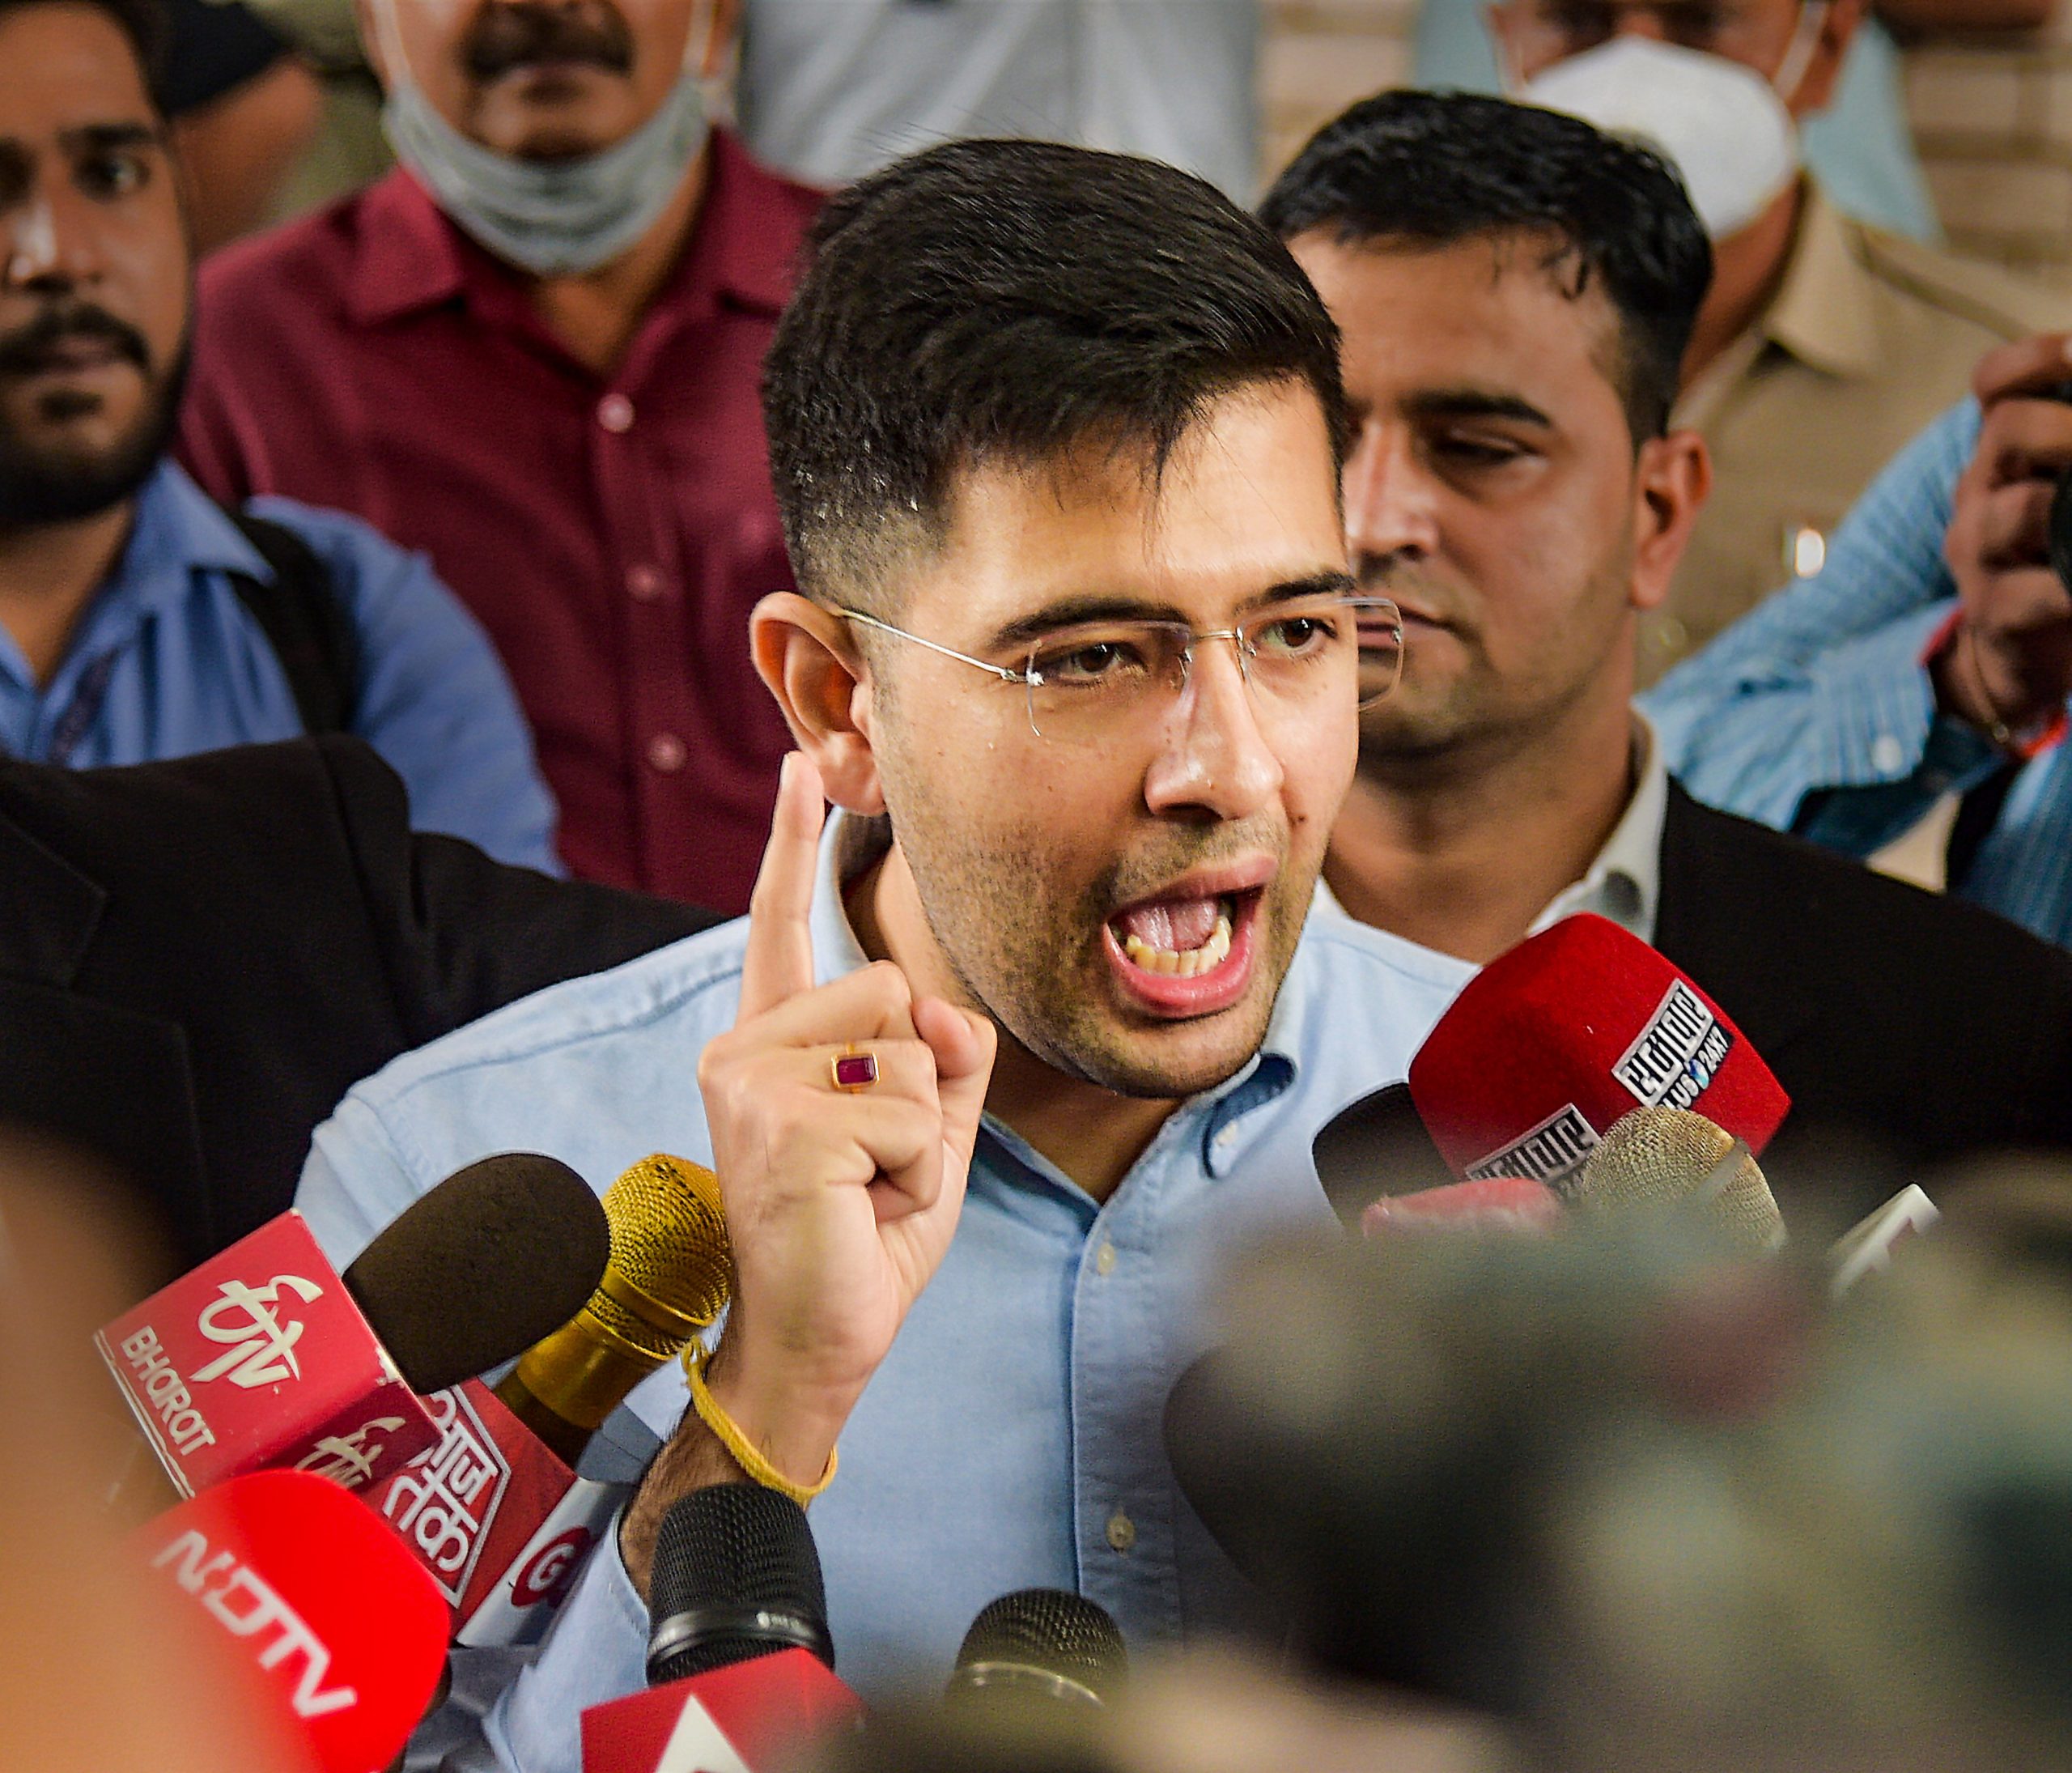 Raghav Chadha education, wife, salary, net worth and other details